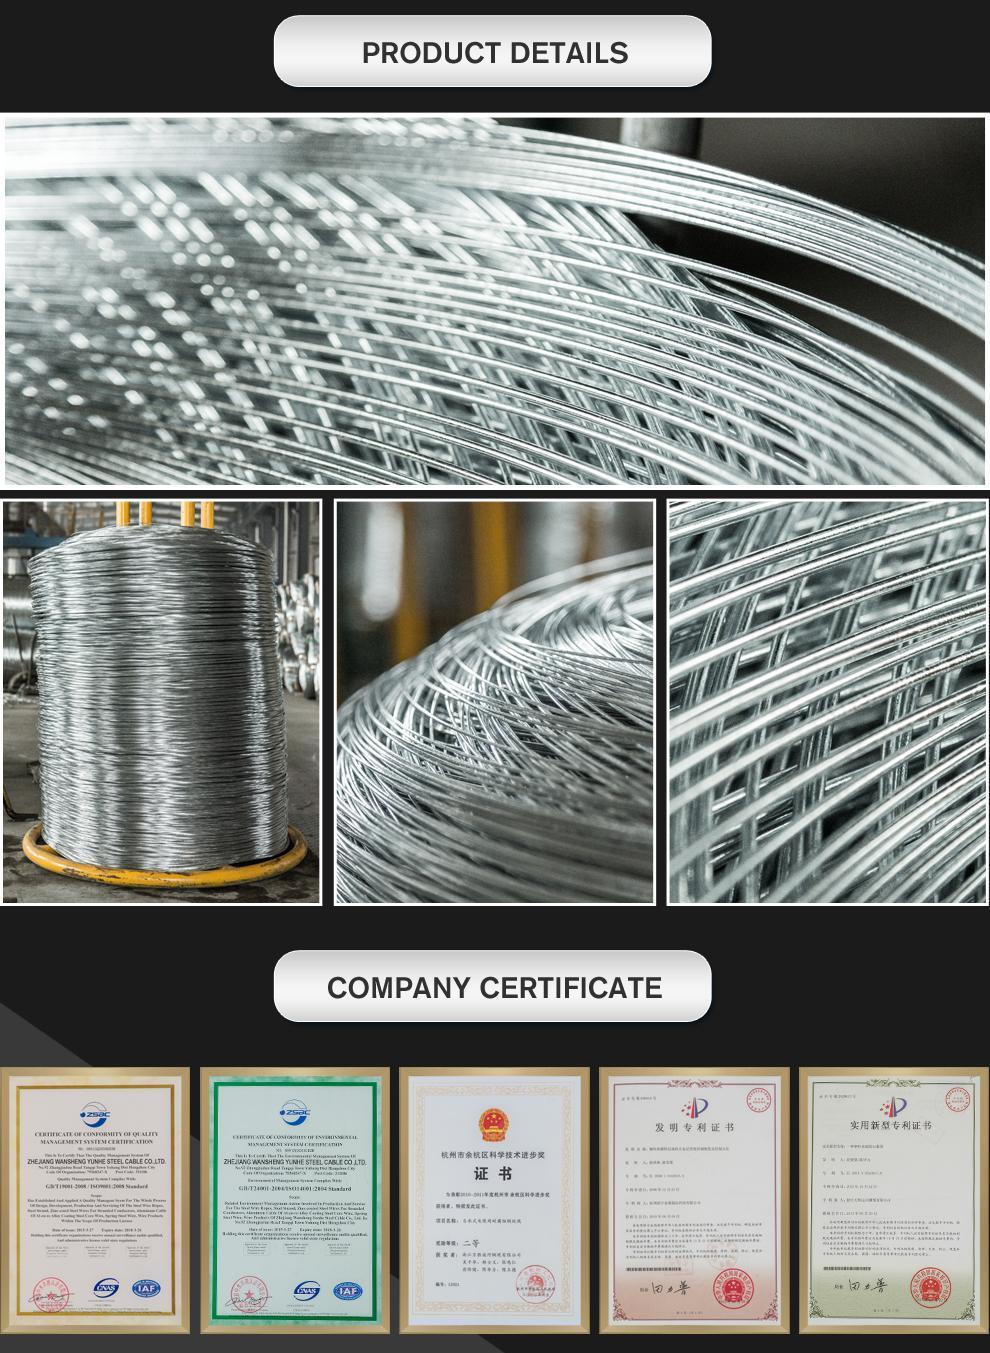 China Supplier High Tension Low Carbon 4.0mm Diameter Gi Steel Wire Q195 Hot Dipped Galvanized Steel Wire